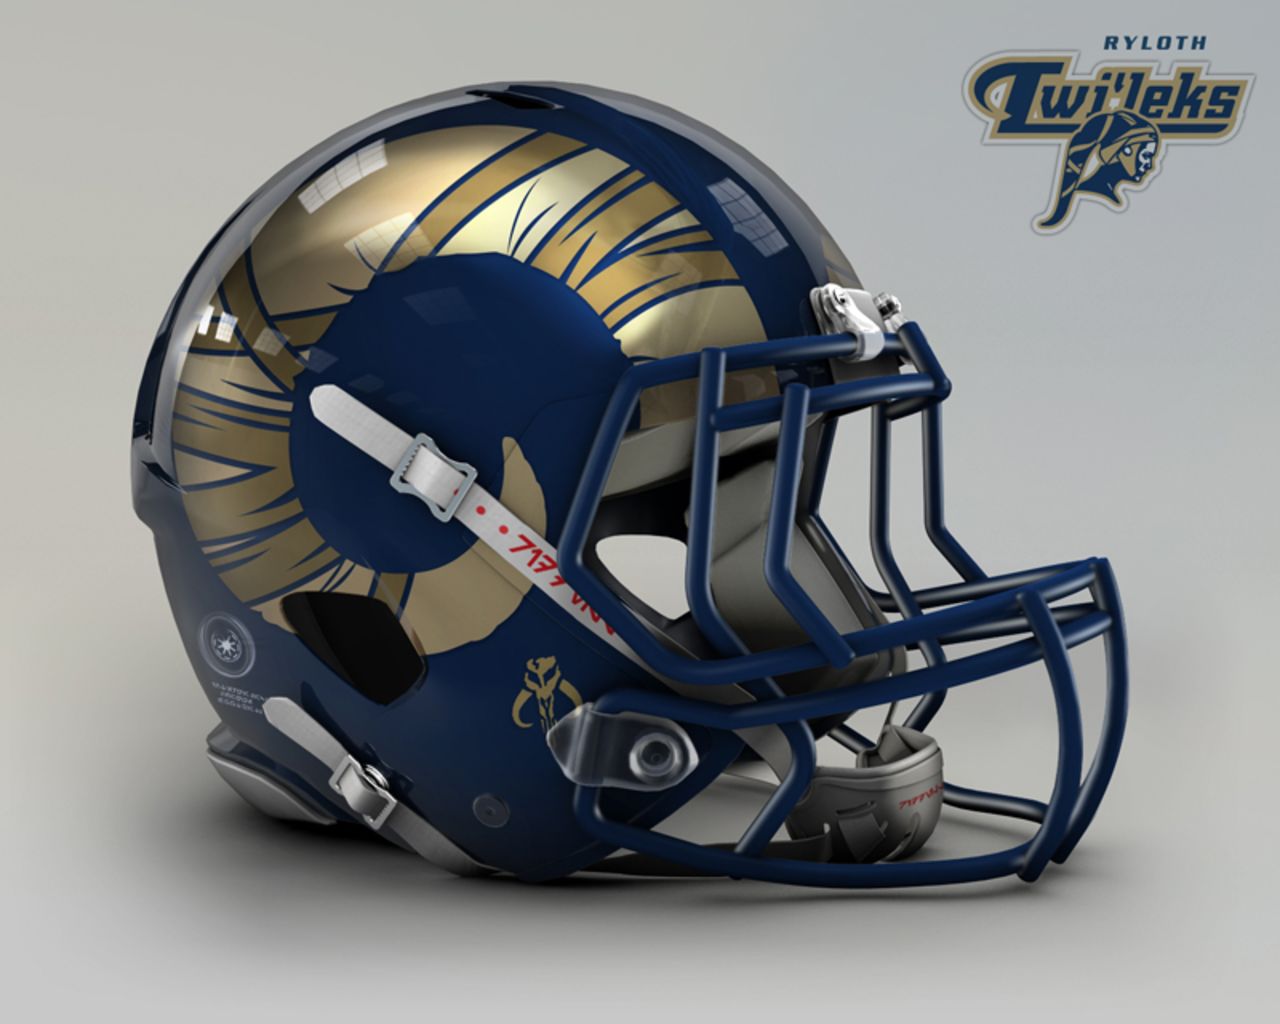 Remember Bib Fortuna, the tall guy with a bunch of tentacles coming out of his skull who played sidekick to Jabba the Hutt? He's a Twi'lek, and the <a href="http://www.stlouisrams.com/" target="_blank" target="_blank">Los Angeles Rams</a> helmet has a design to match those unique features.